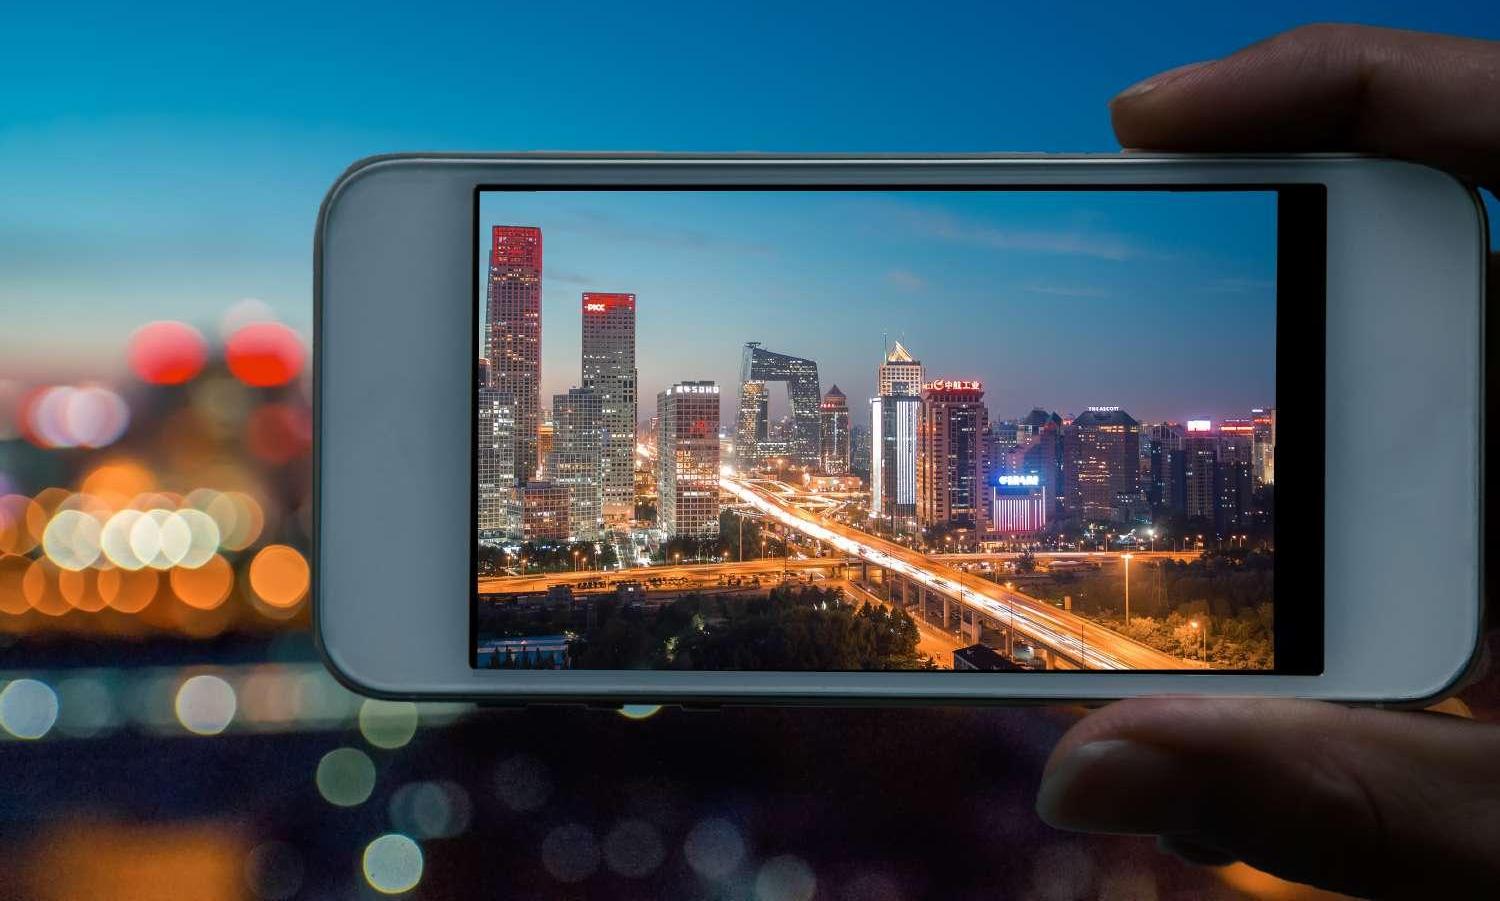 Beijing Skyline City Lights At Night With Iphone Smartphone Frame